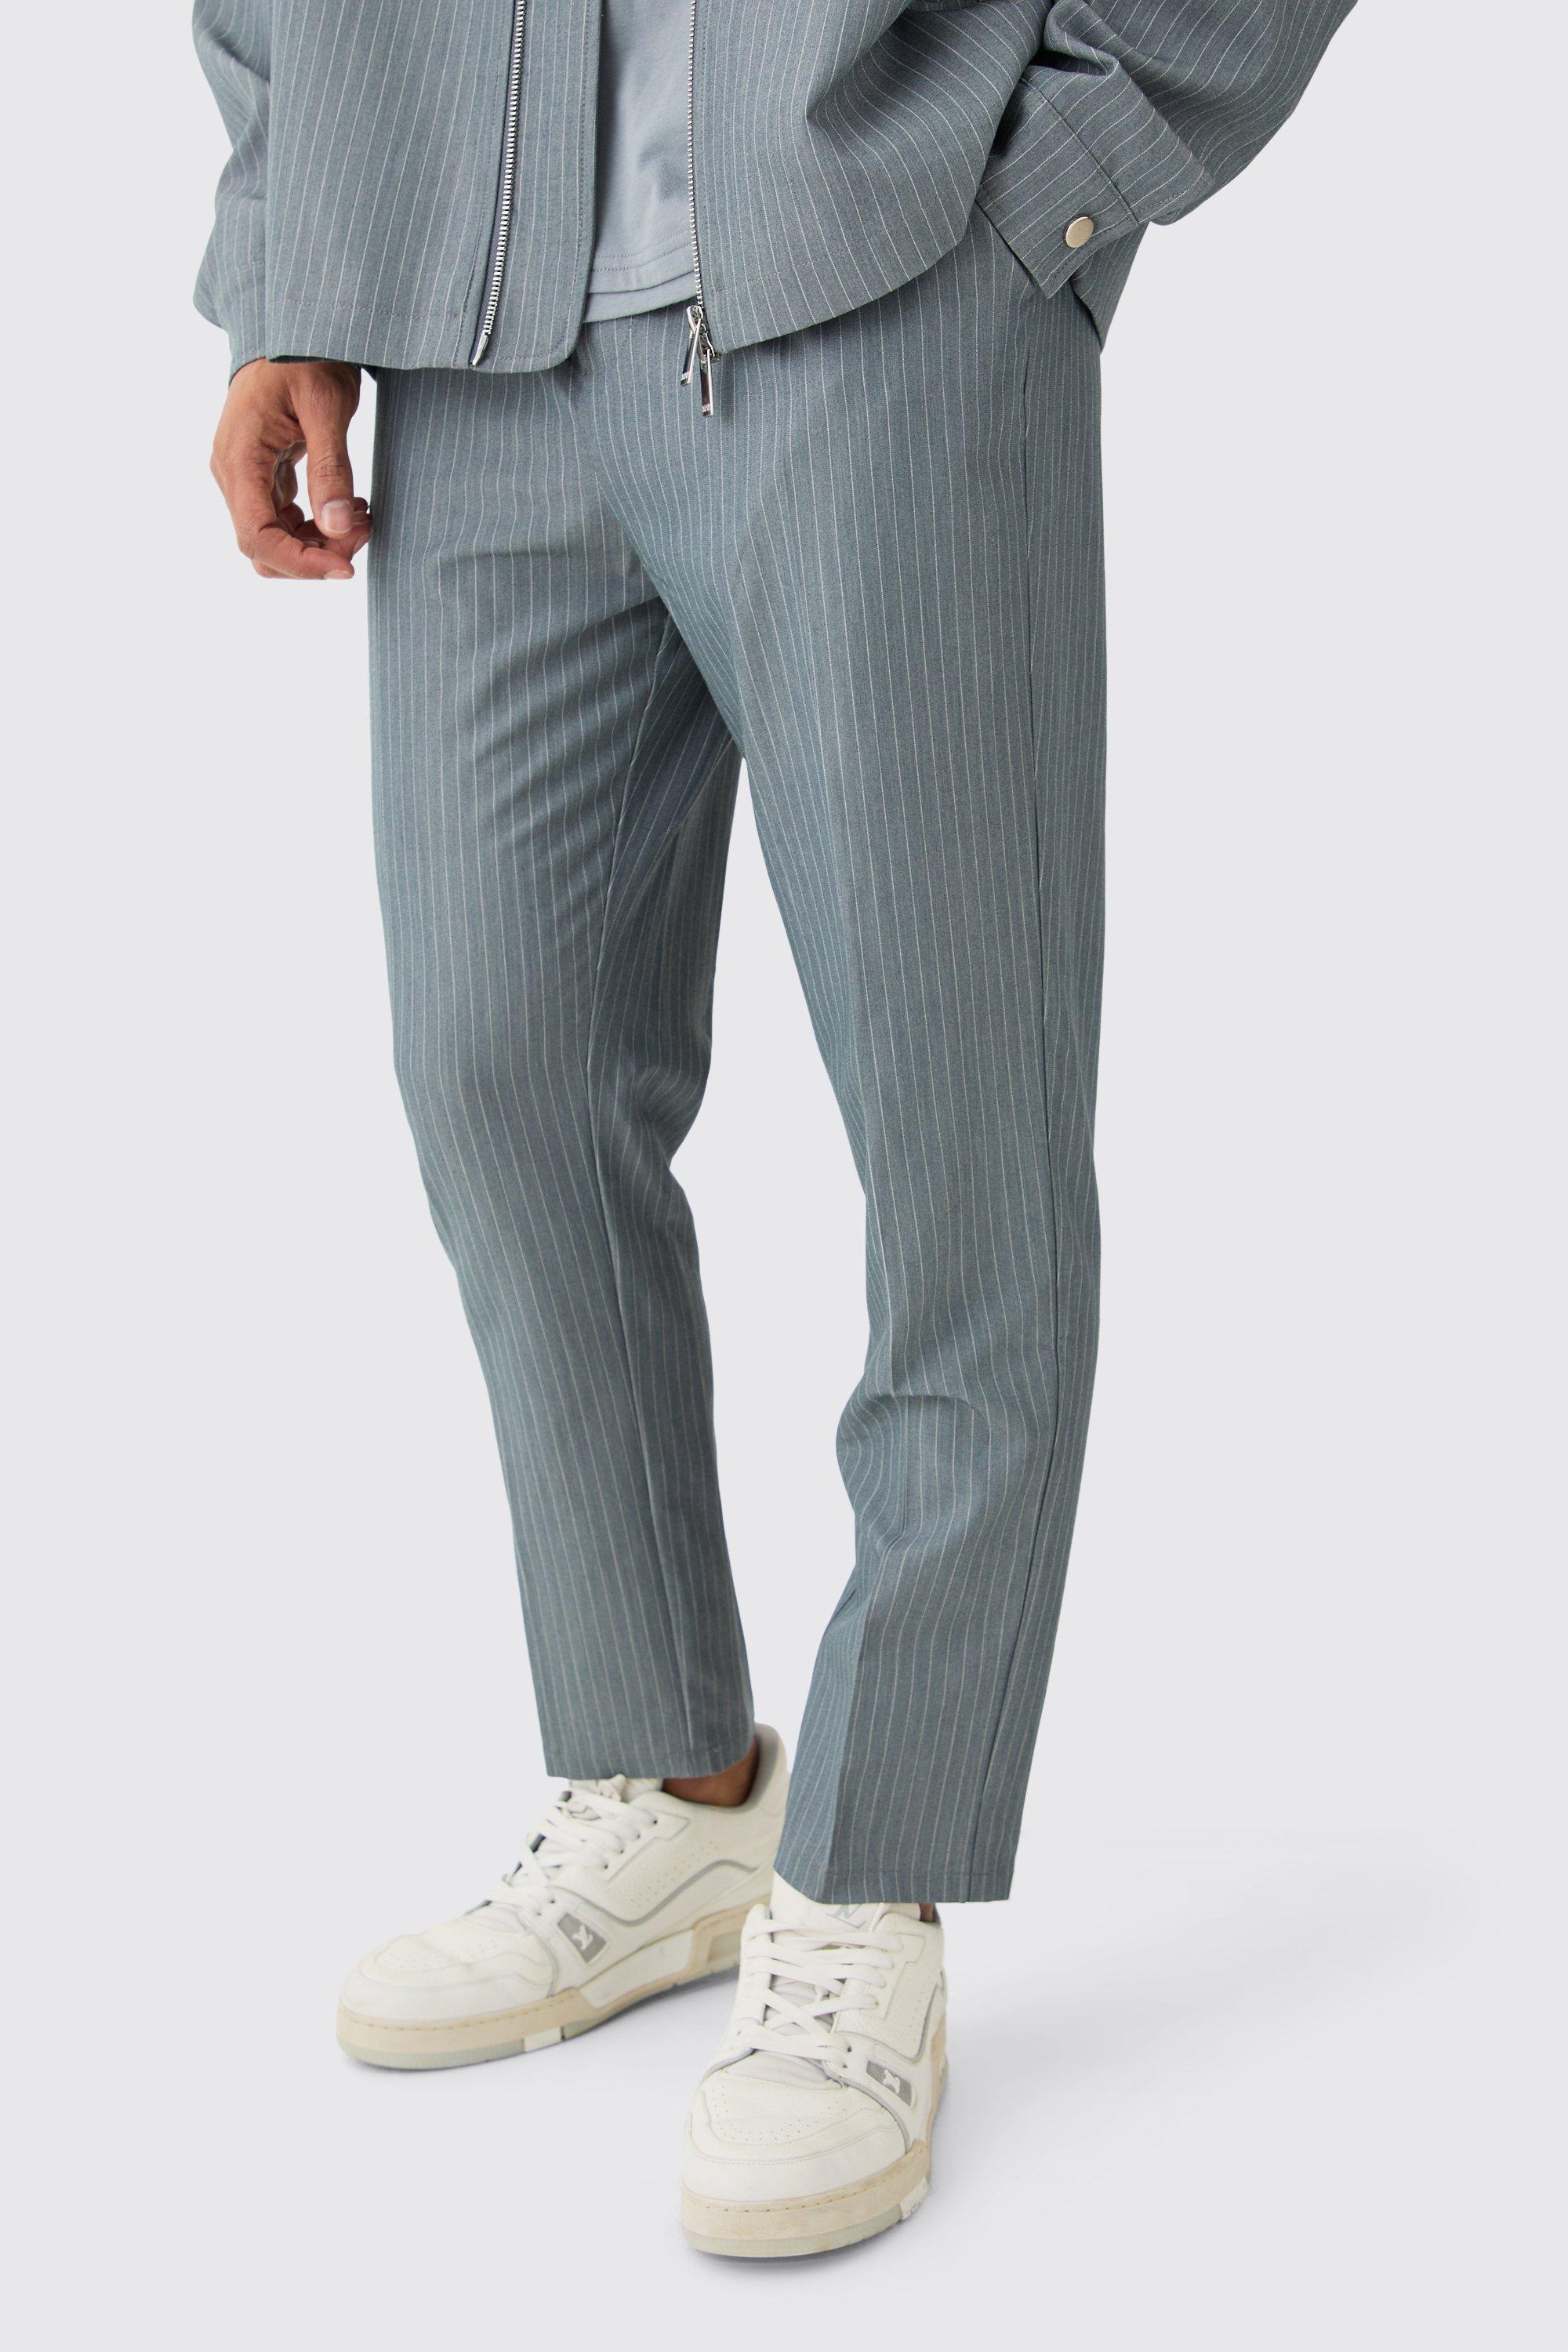 Mens Grey Pinstripe Elasticated Waist Tapered Trousers, Grey